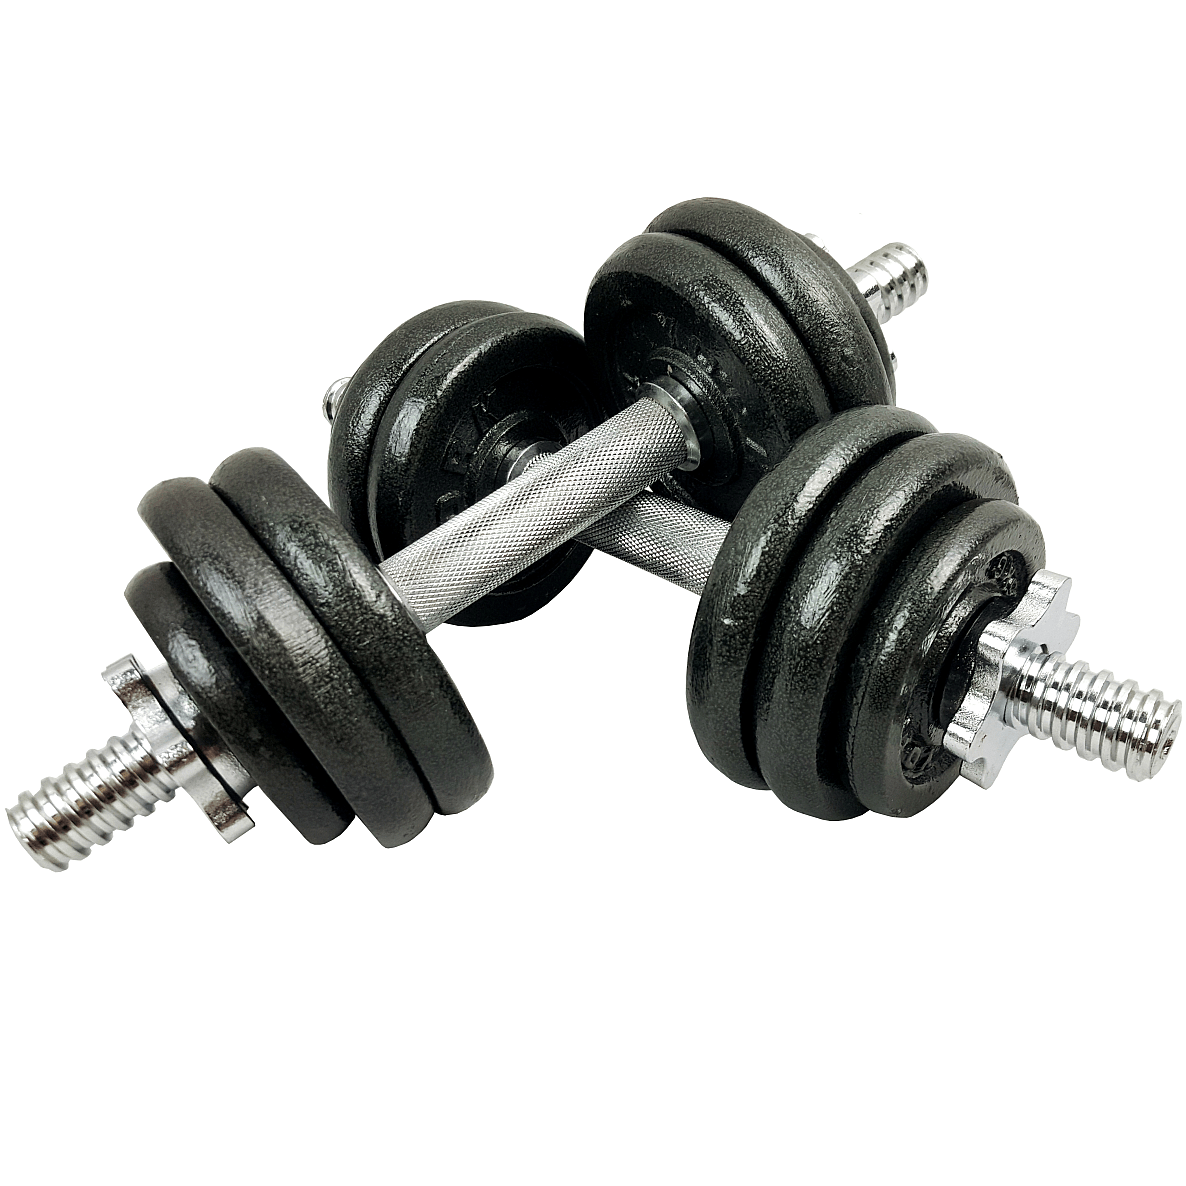 15 Kg Dumbbell Set With Case The Fitness 15 Kg Cast Iron Dumbbell Set Is Designed For Home Toning And Strength Workout Usage. The Traditional 1&Quot; Standard Cast Plate Design Is Easy To Pick Up And Load Onto The Bars With The Quality Spinlock Collars Ensuring A Safe And Secure Fit On The Bar, Along With Quick Plate Changes. The Knurled Black Dumbbell Sleeves Ensures A Great Grip Whilst Working Out. The Dumbbell Set Can Be Used For A Wide Range Of Exercises To Help Pump Your Muscles And Tone Your Arms. The Set Lets You Adjust The Lifting Weight Up To A Maximum Of Two 7.5 Kg Dumbbells. Dumbbell Set 15 Kg With Packing Case